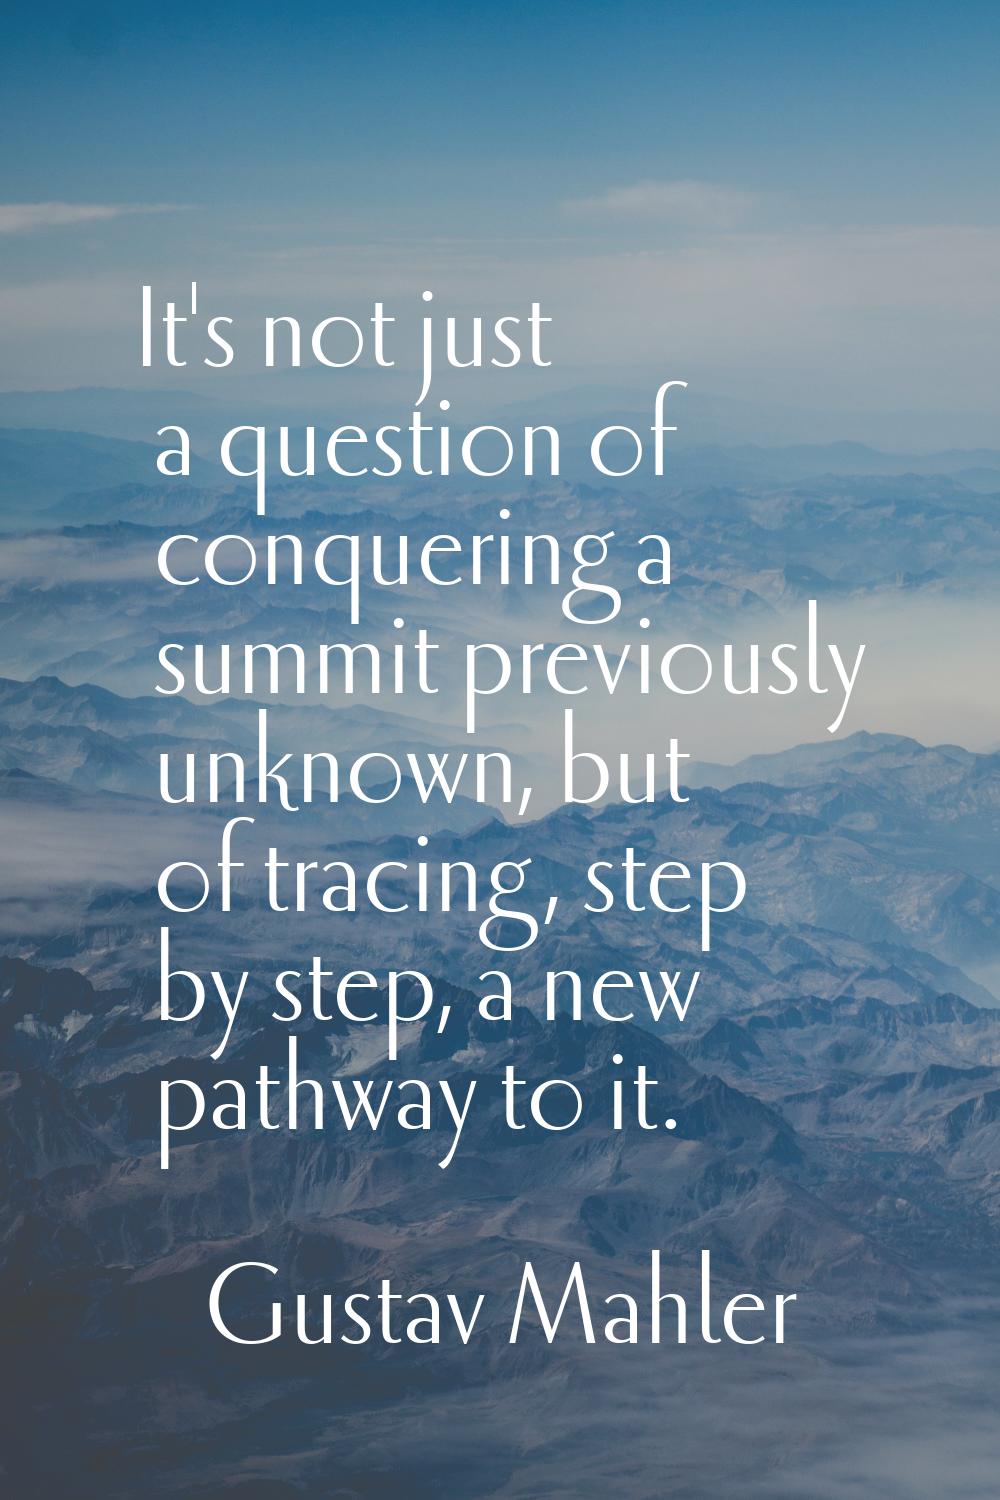 It's not just a question of conquering a summit previously unknown, but of tracing, step by step, a